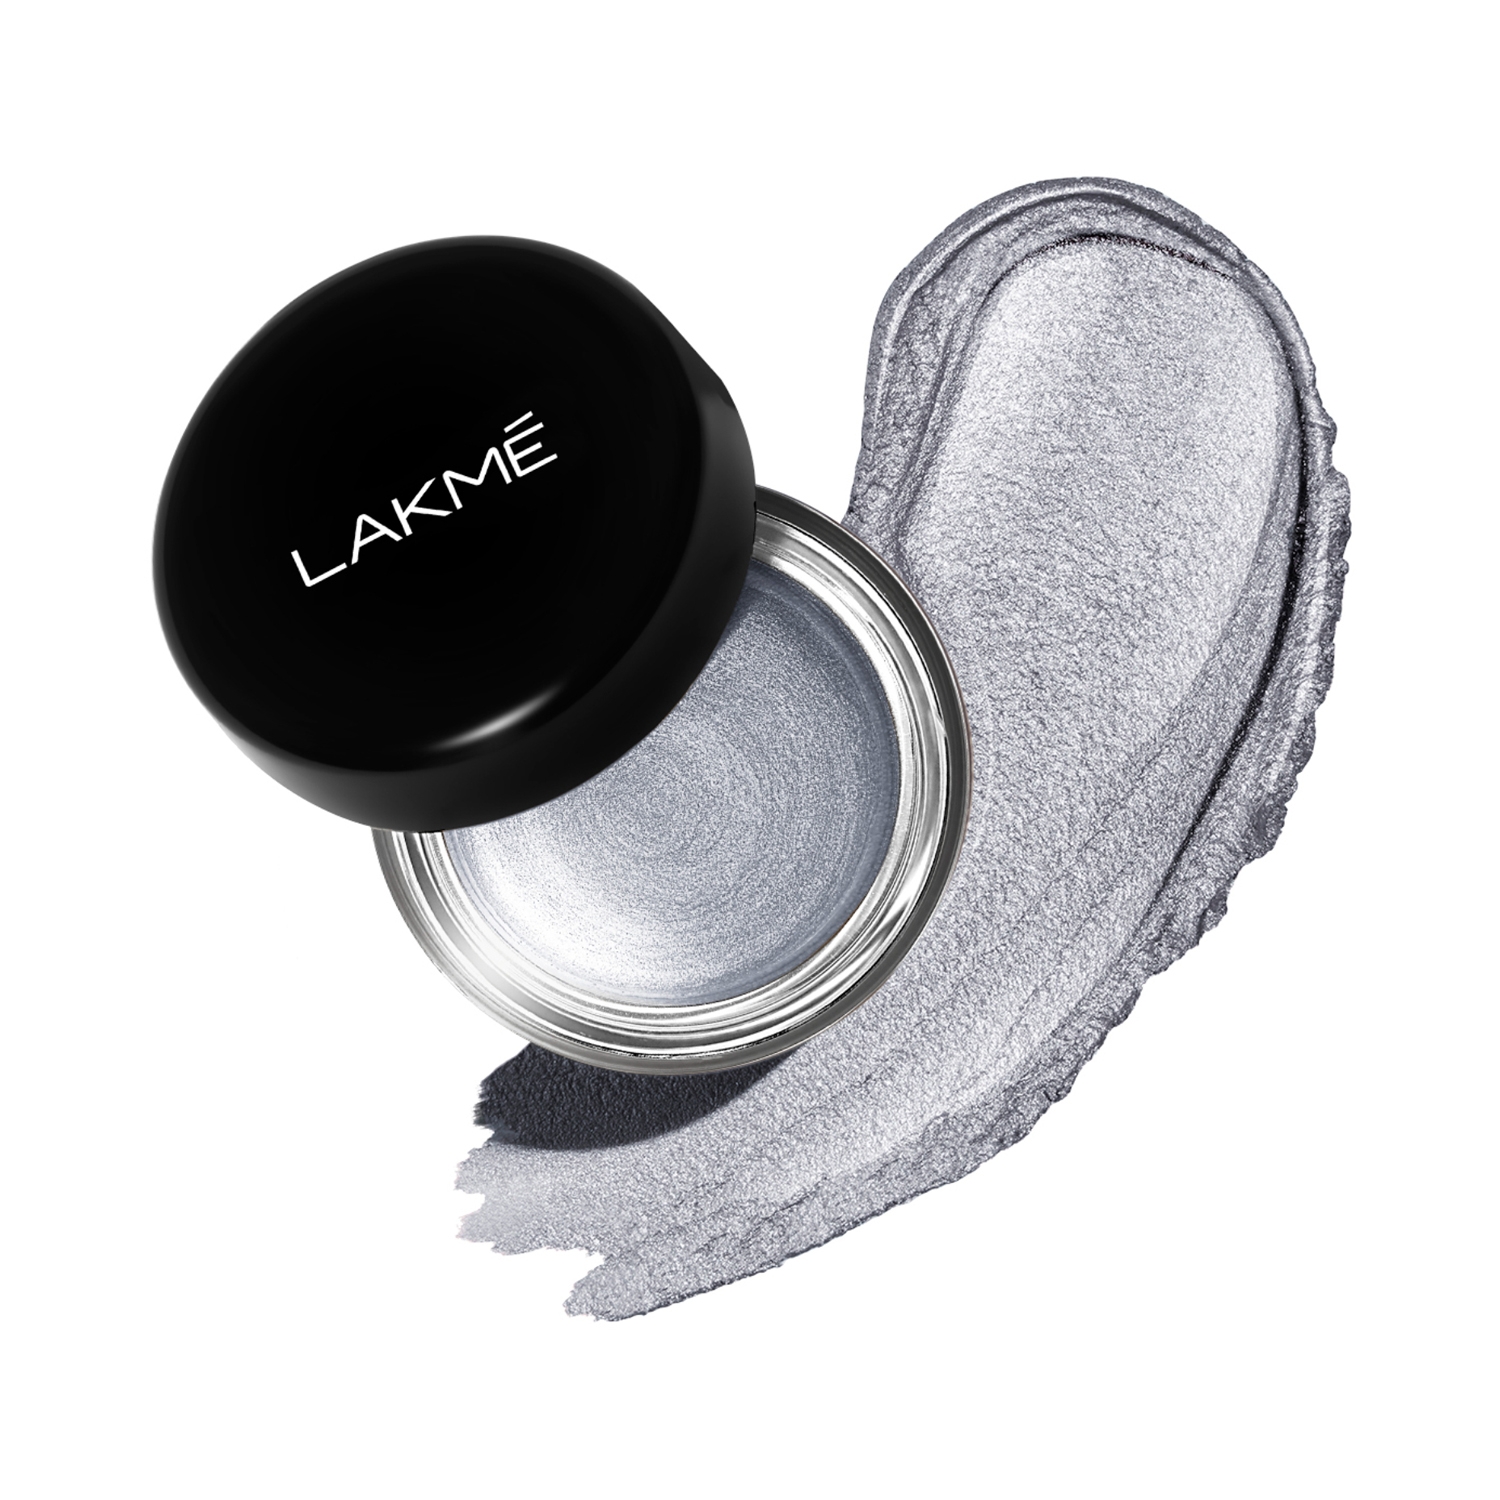 Lakme | Lakme Absolute Explore Eye Paint - Shimmering Silver (3g)